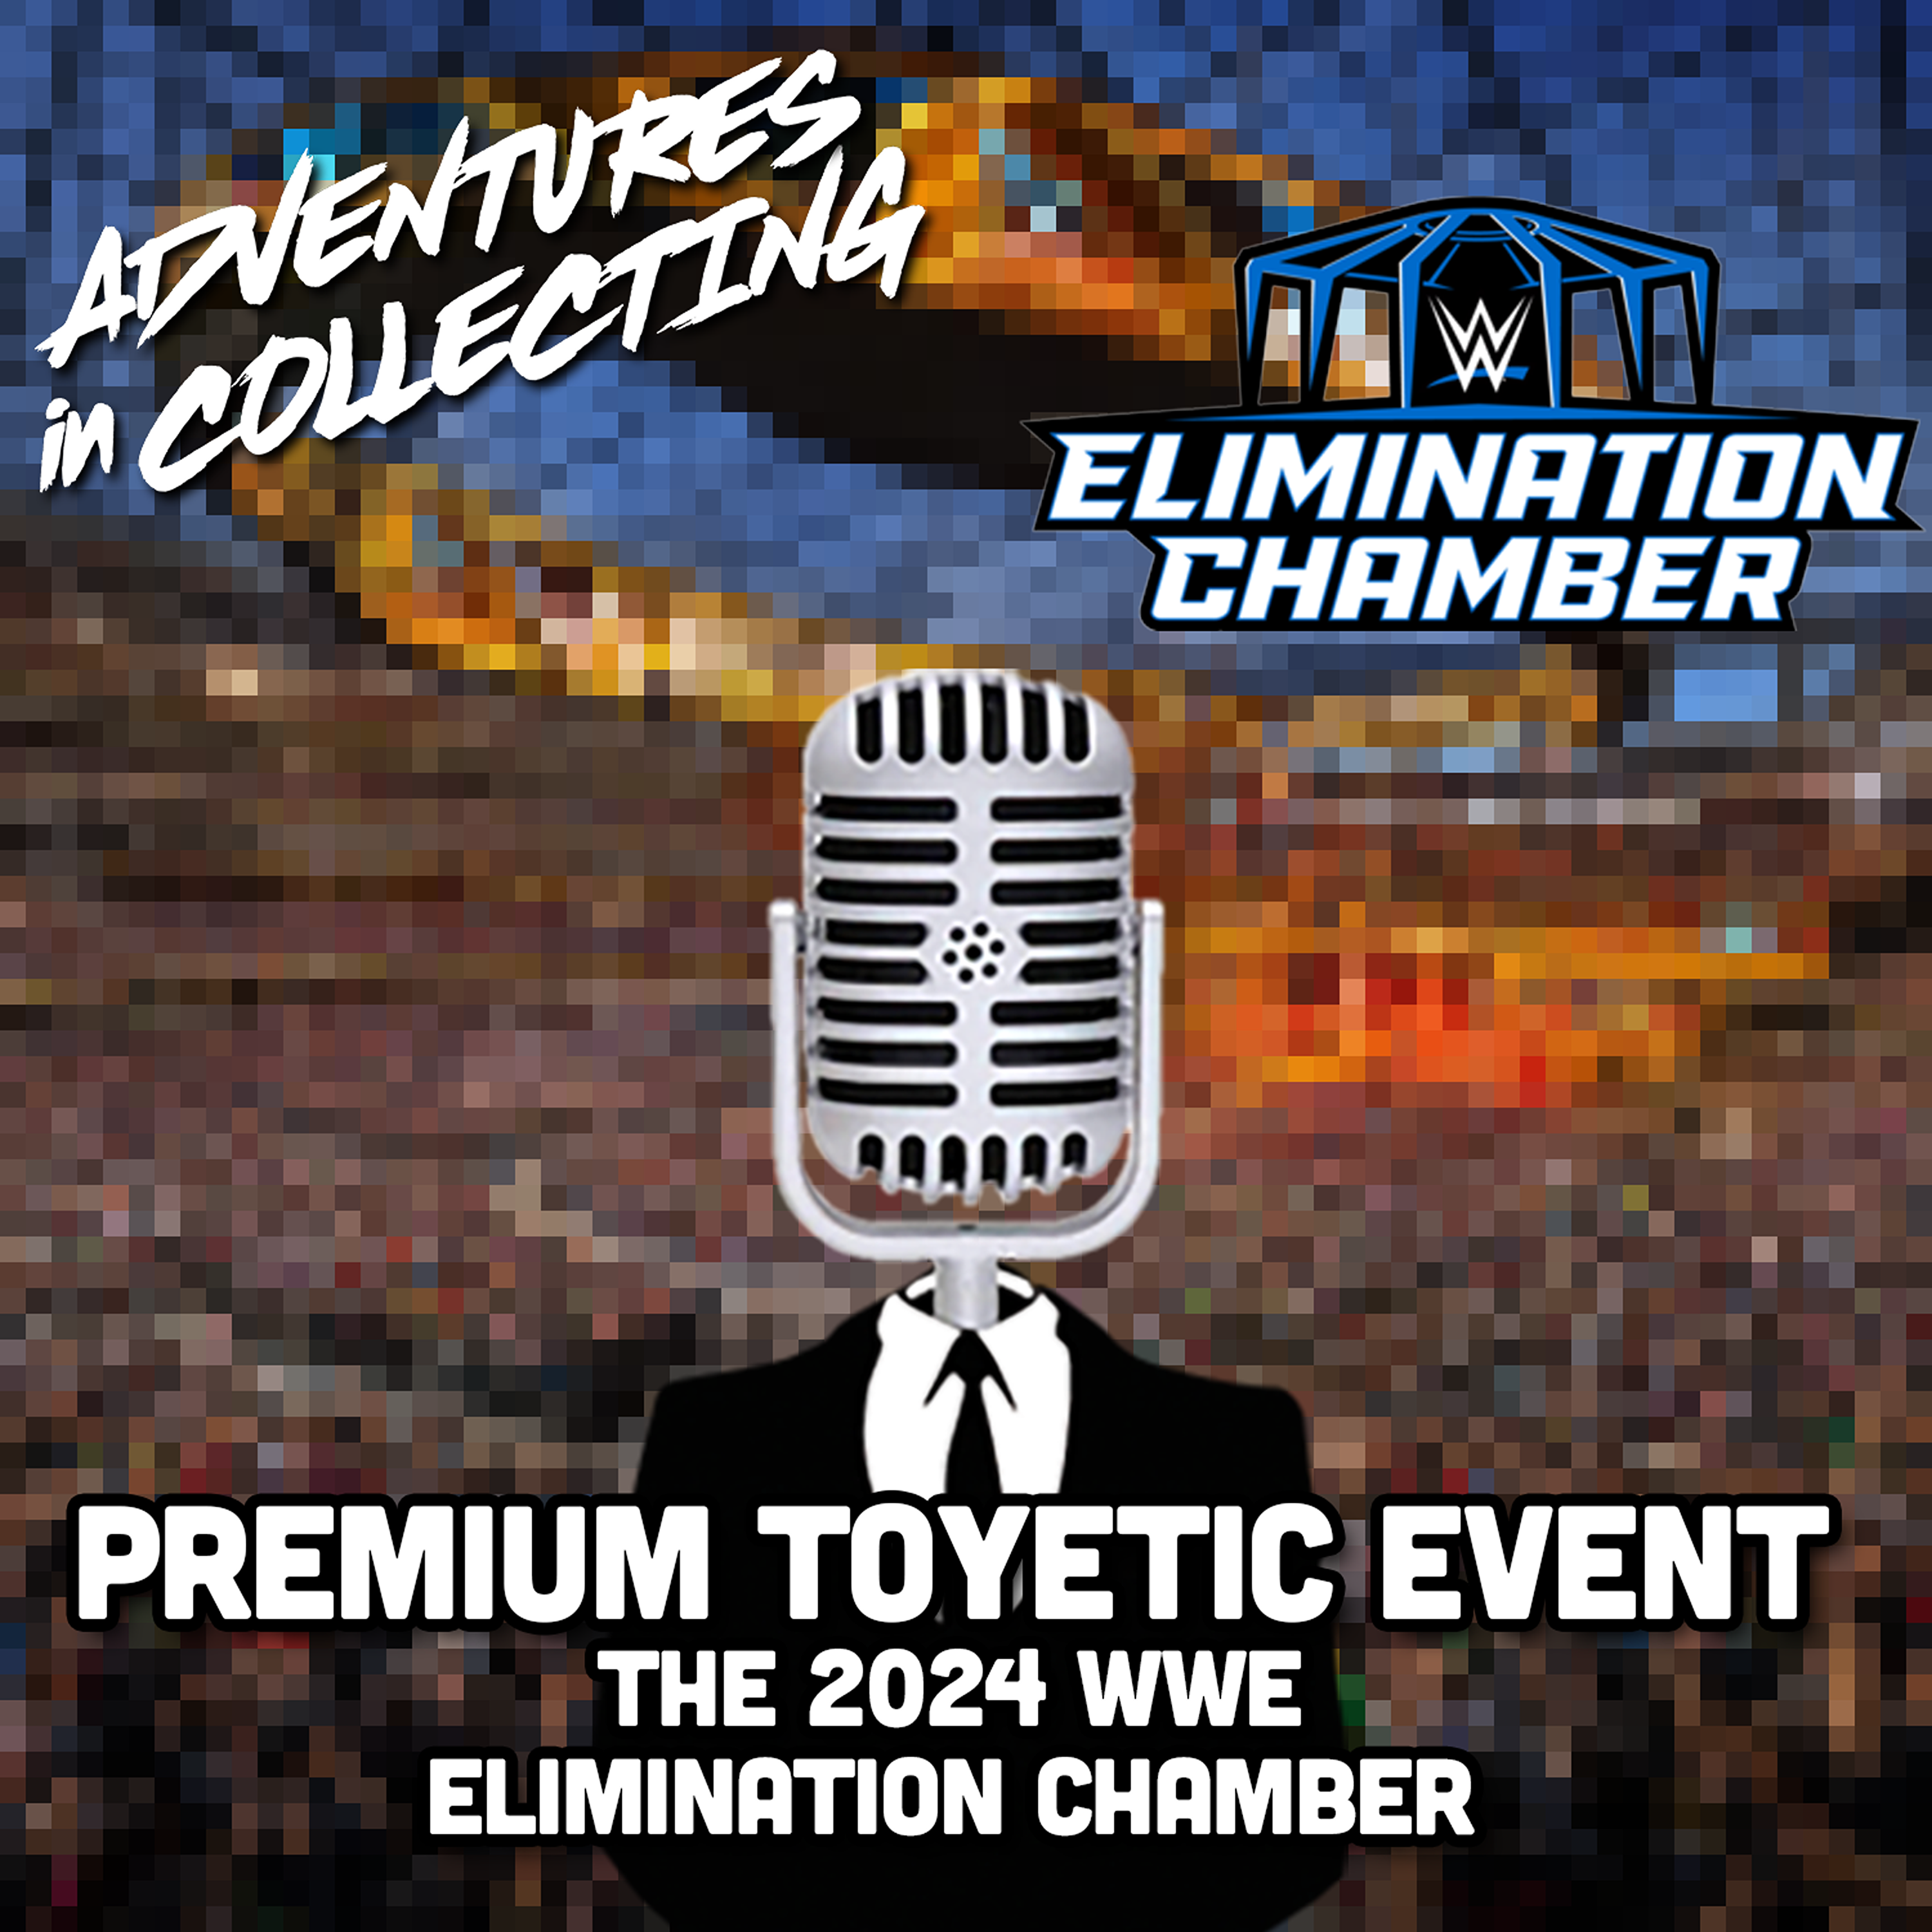 Premium Toyetic Event: The 2024 WWE Elimination Chamber – Adventures in Collecting